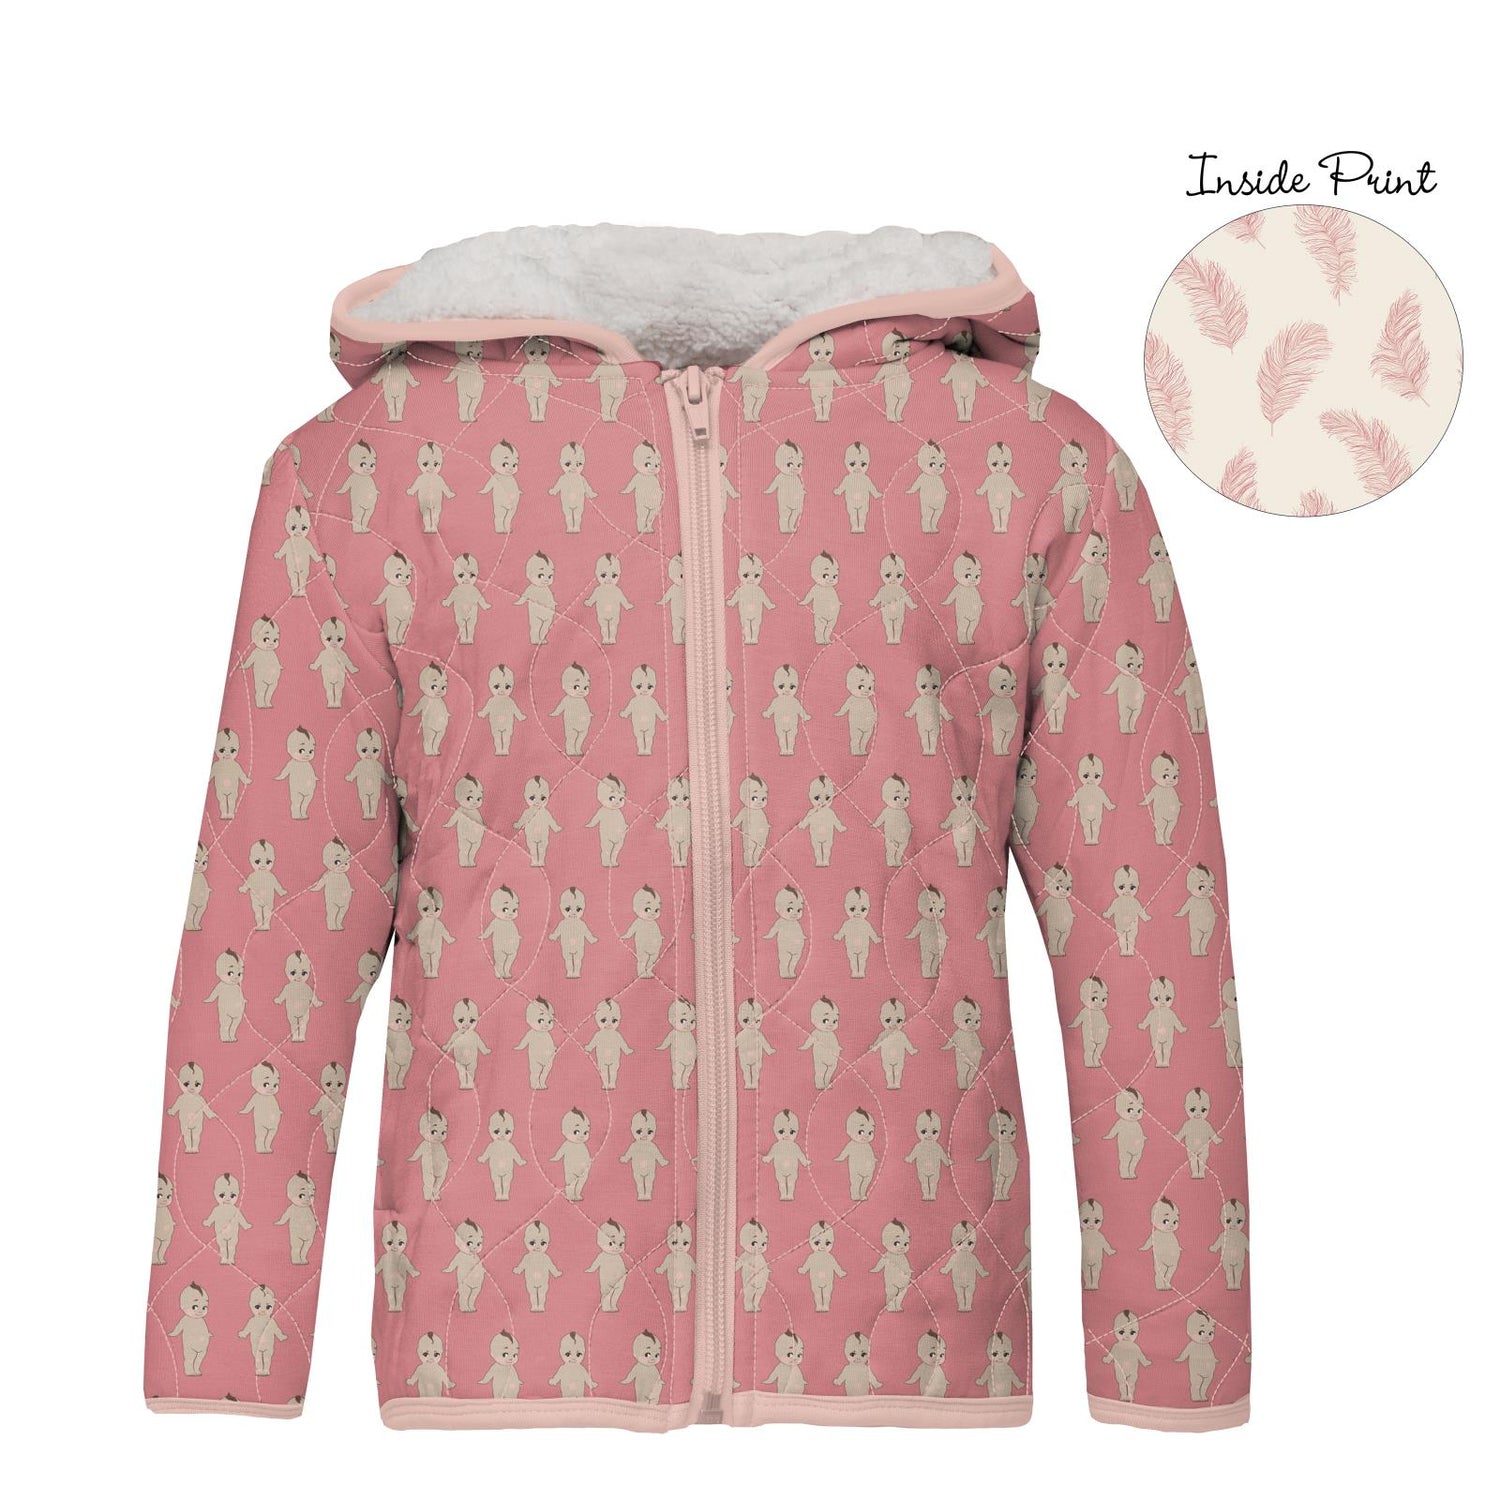 Print Quilted Jacket with Sherpa-Lined Hood in Desert Rose Baby Doll/Natural Feathers